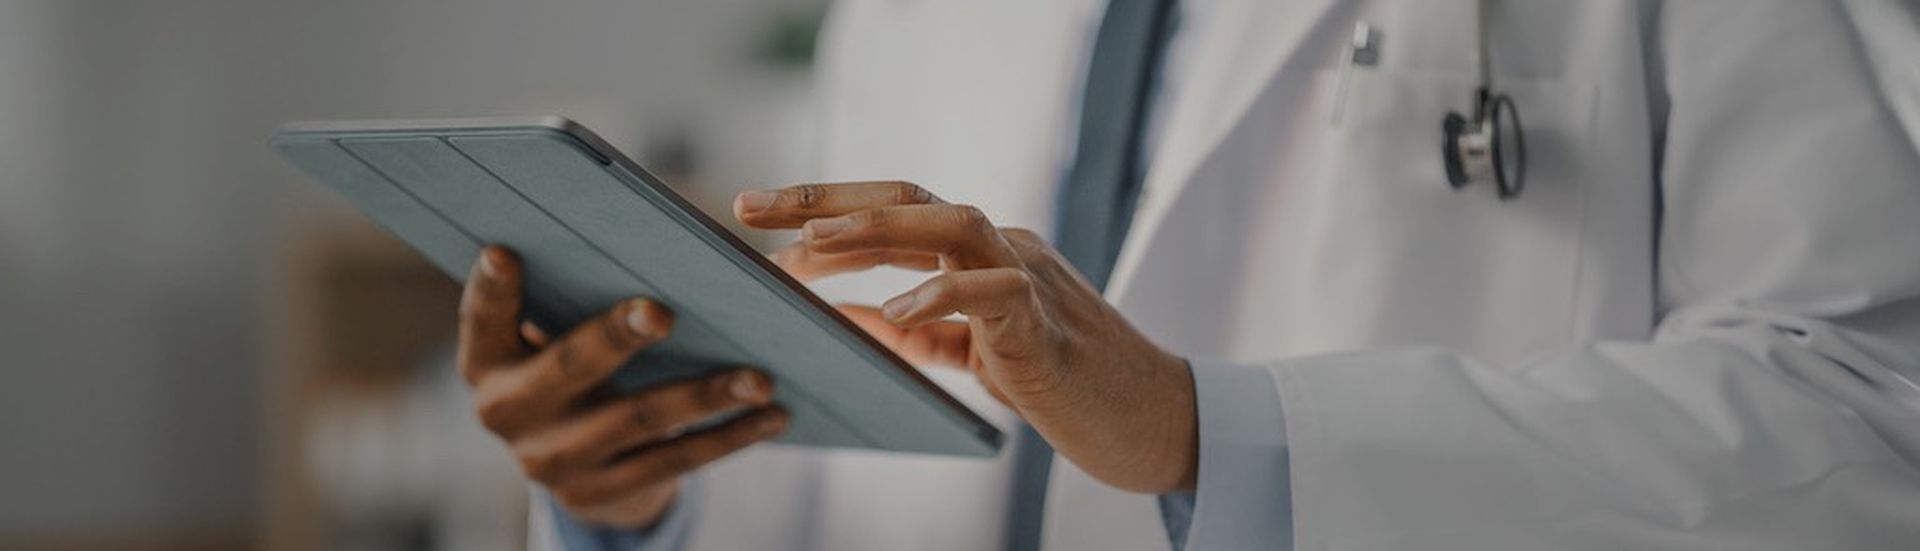 Close Up Shot of a African American Male Doctor Wearing White Coat Working on Tablet Computer at His Office. Medical Health Care Professional Working with Test Results, Patient Treatment Planning. (Close Up Shot of a African American Male Doctor Weari